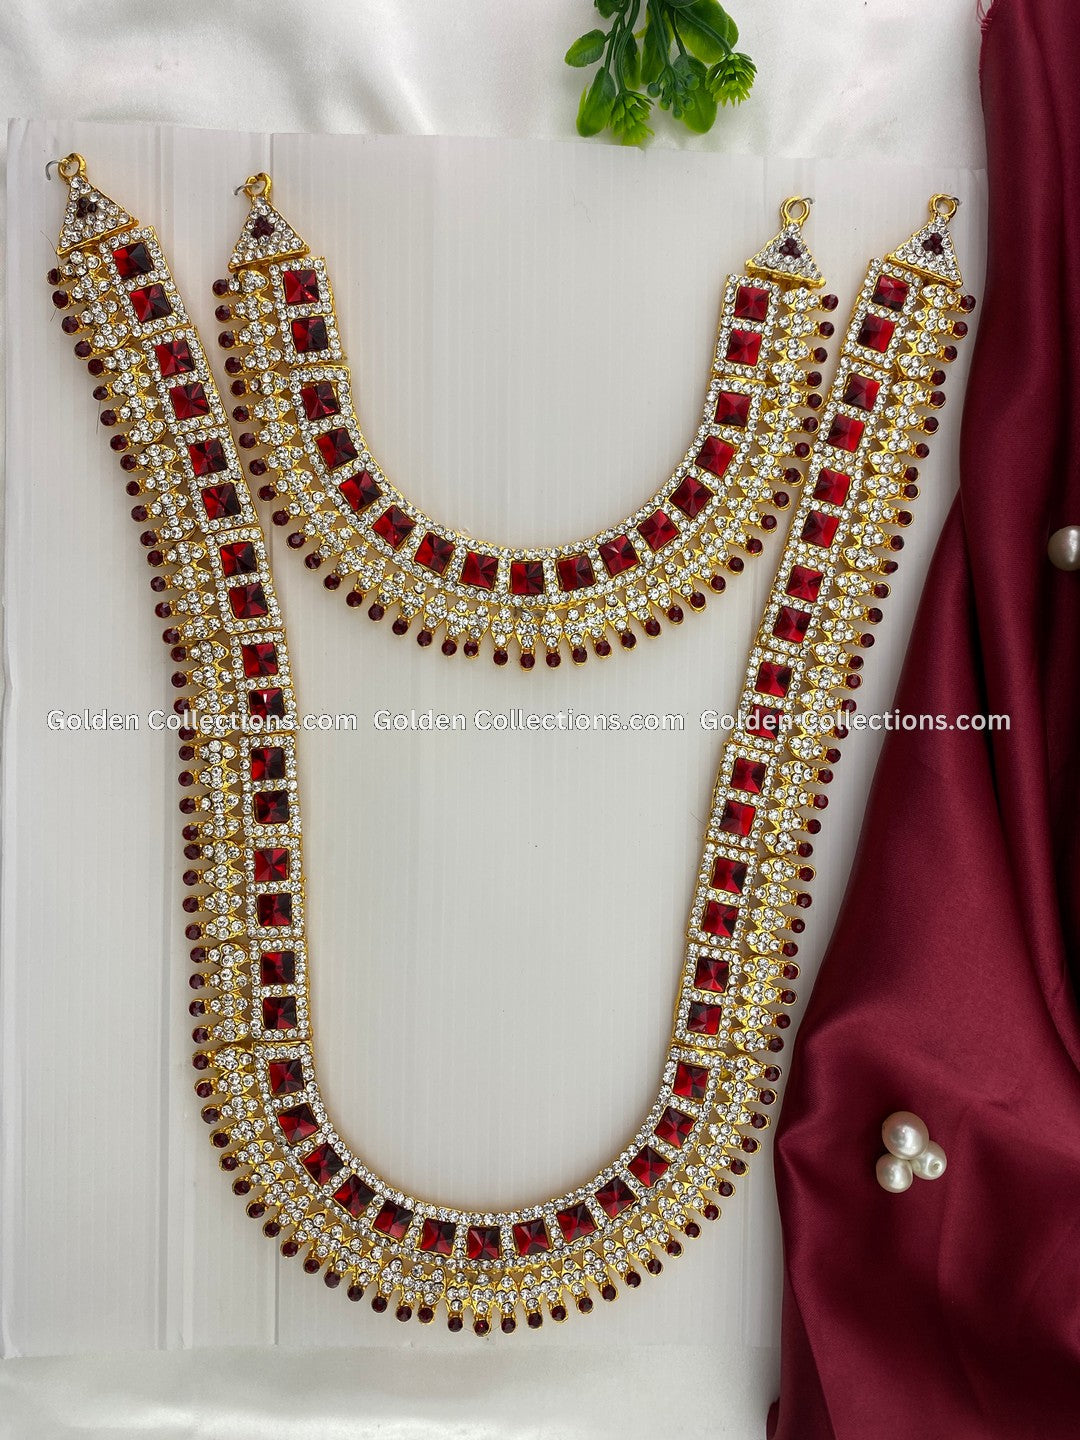 Adorn with Decorative Deity Long Necklace-GoldenCollections